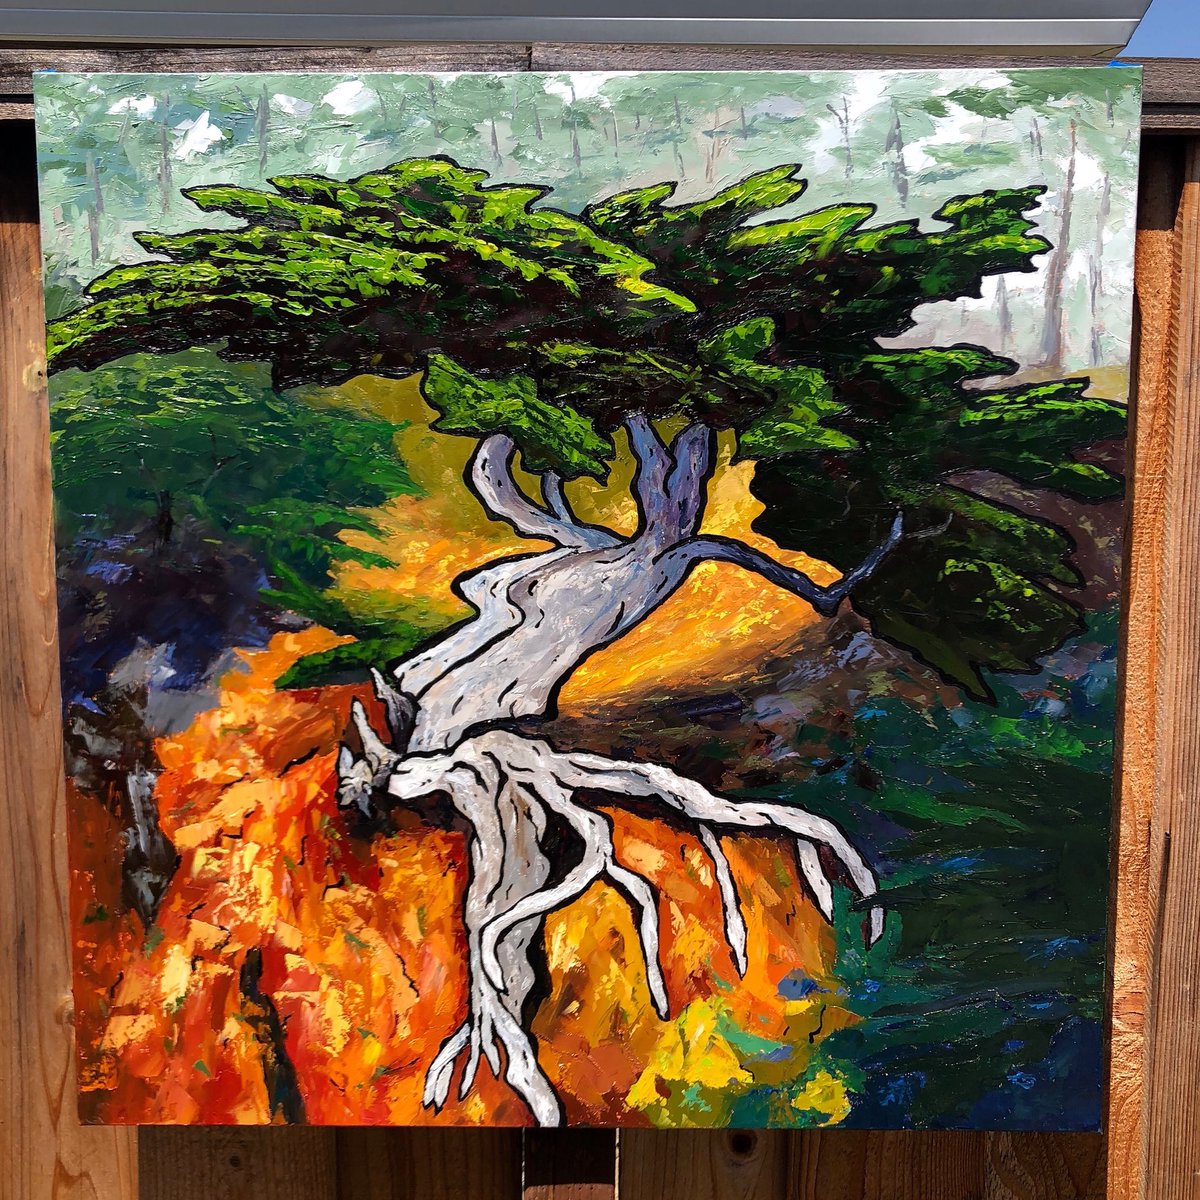 Just finished this #OilPainting of the Monterey Cypress called “Old Veteran” which hangs on a cliff side in Point Lobos.  #paletteknife #fineart #californiaartist #Pointlobos #artbusiness #PebbleBeach #artgallery #fauvism #studiolife